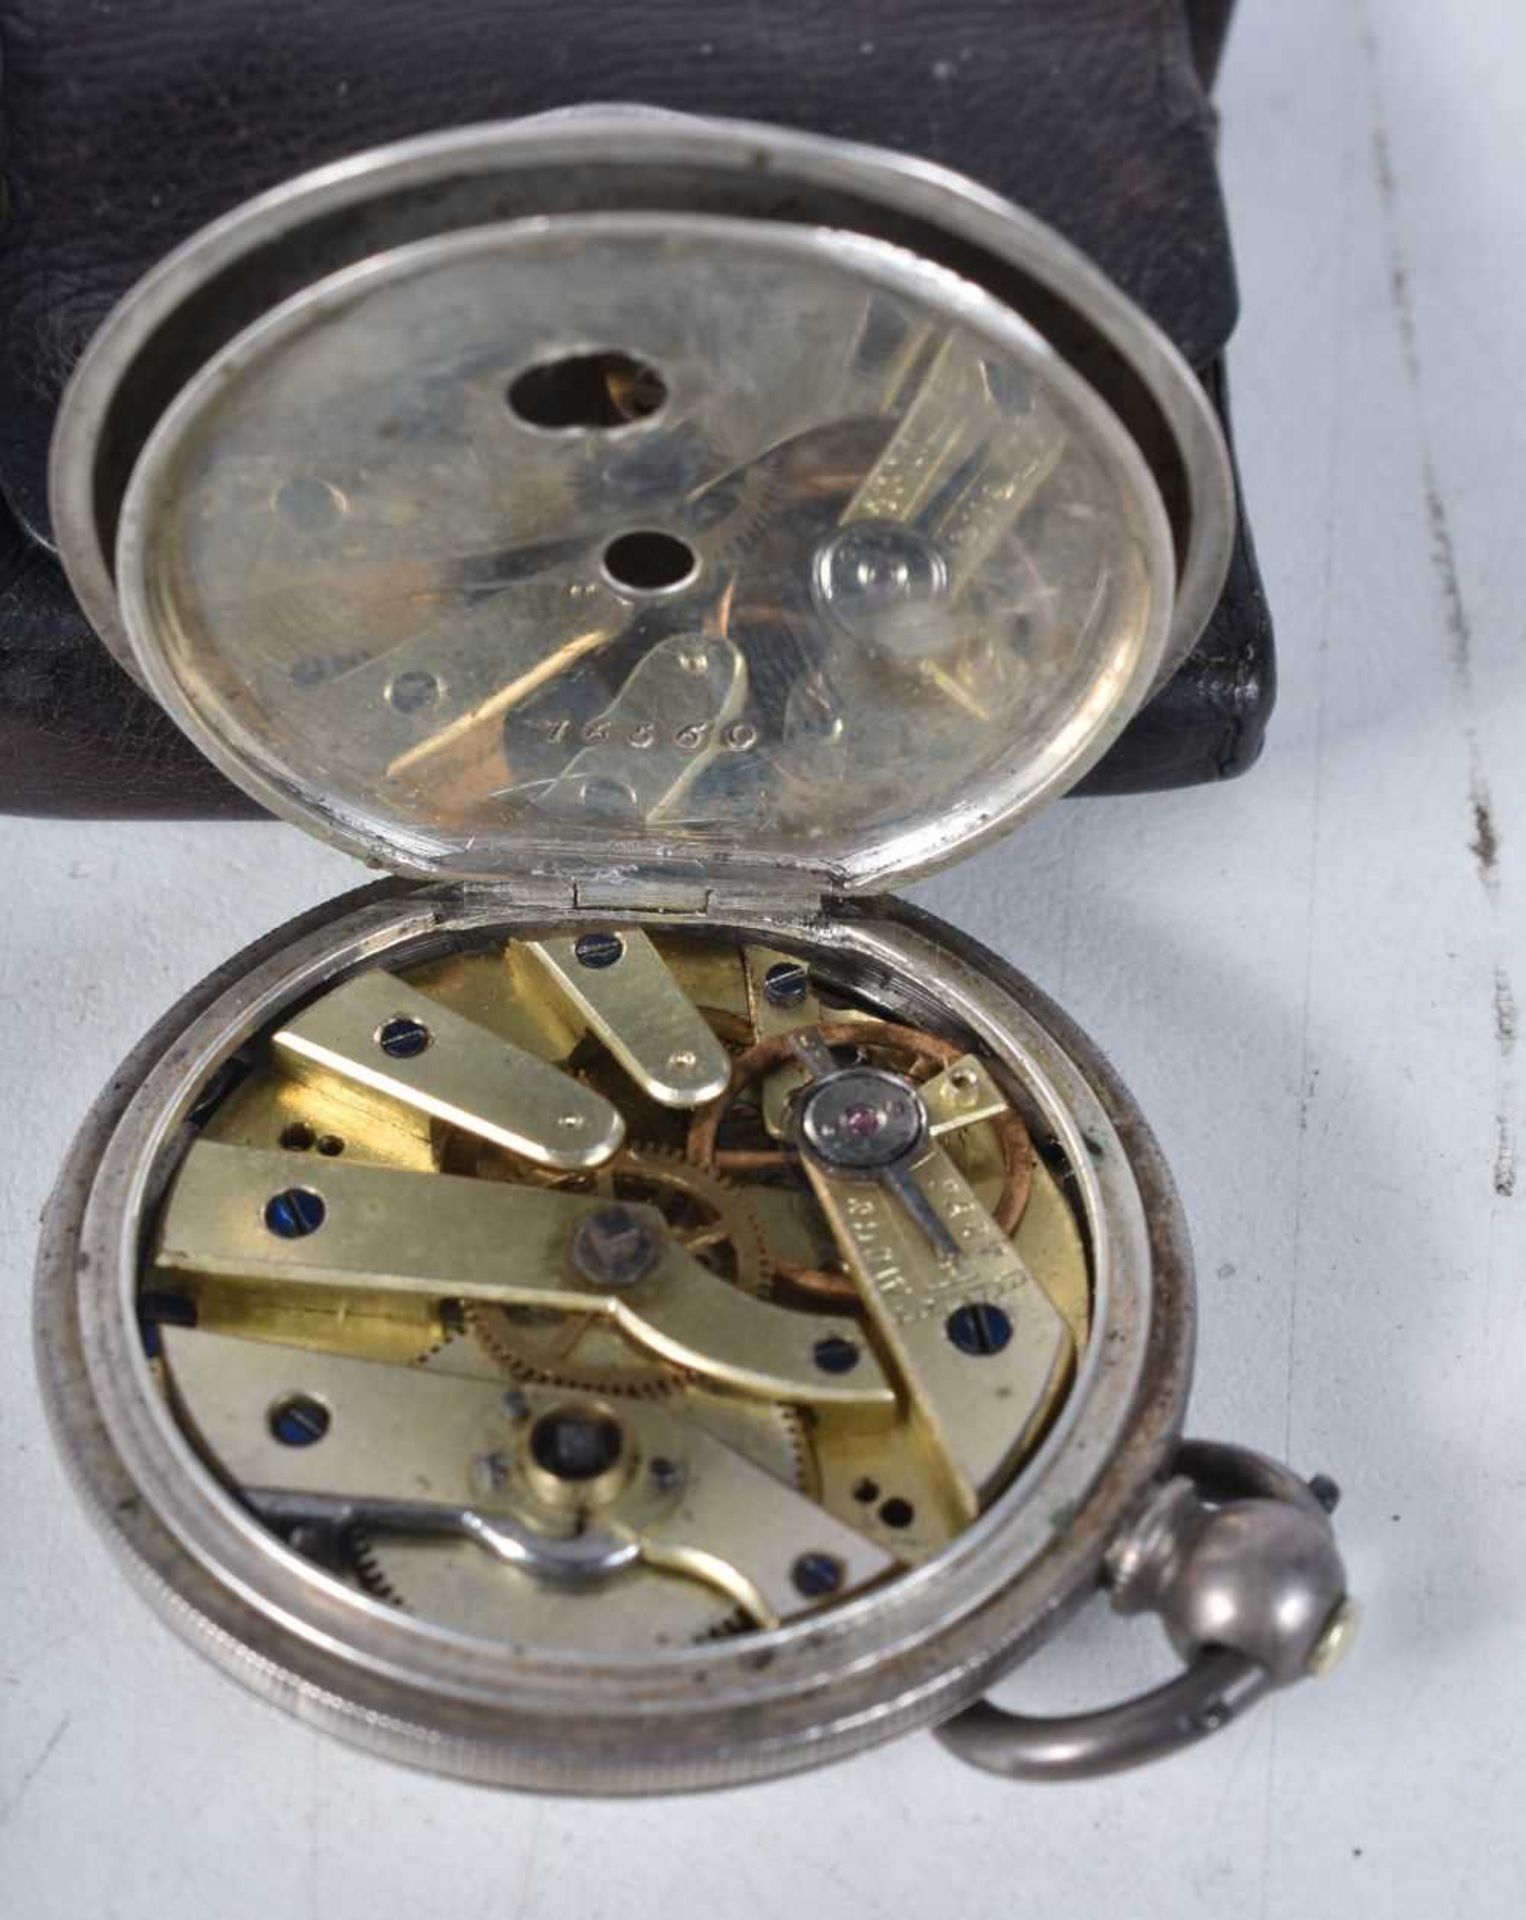 A Miniature Silver Half Hunter Pocket Watch with Black Enamel Numerals on Case in a Leather Pouch. - Image 3 of 3